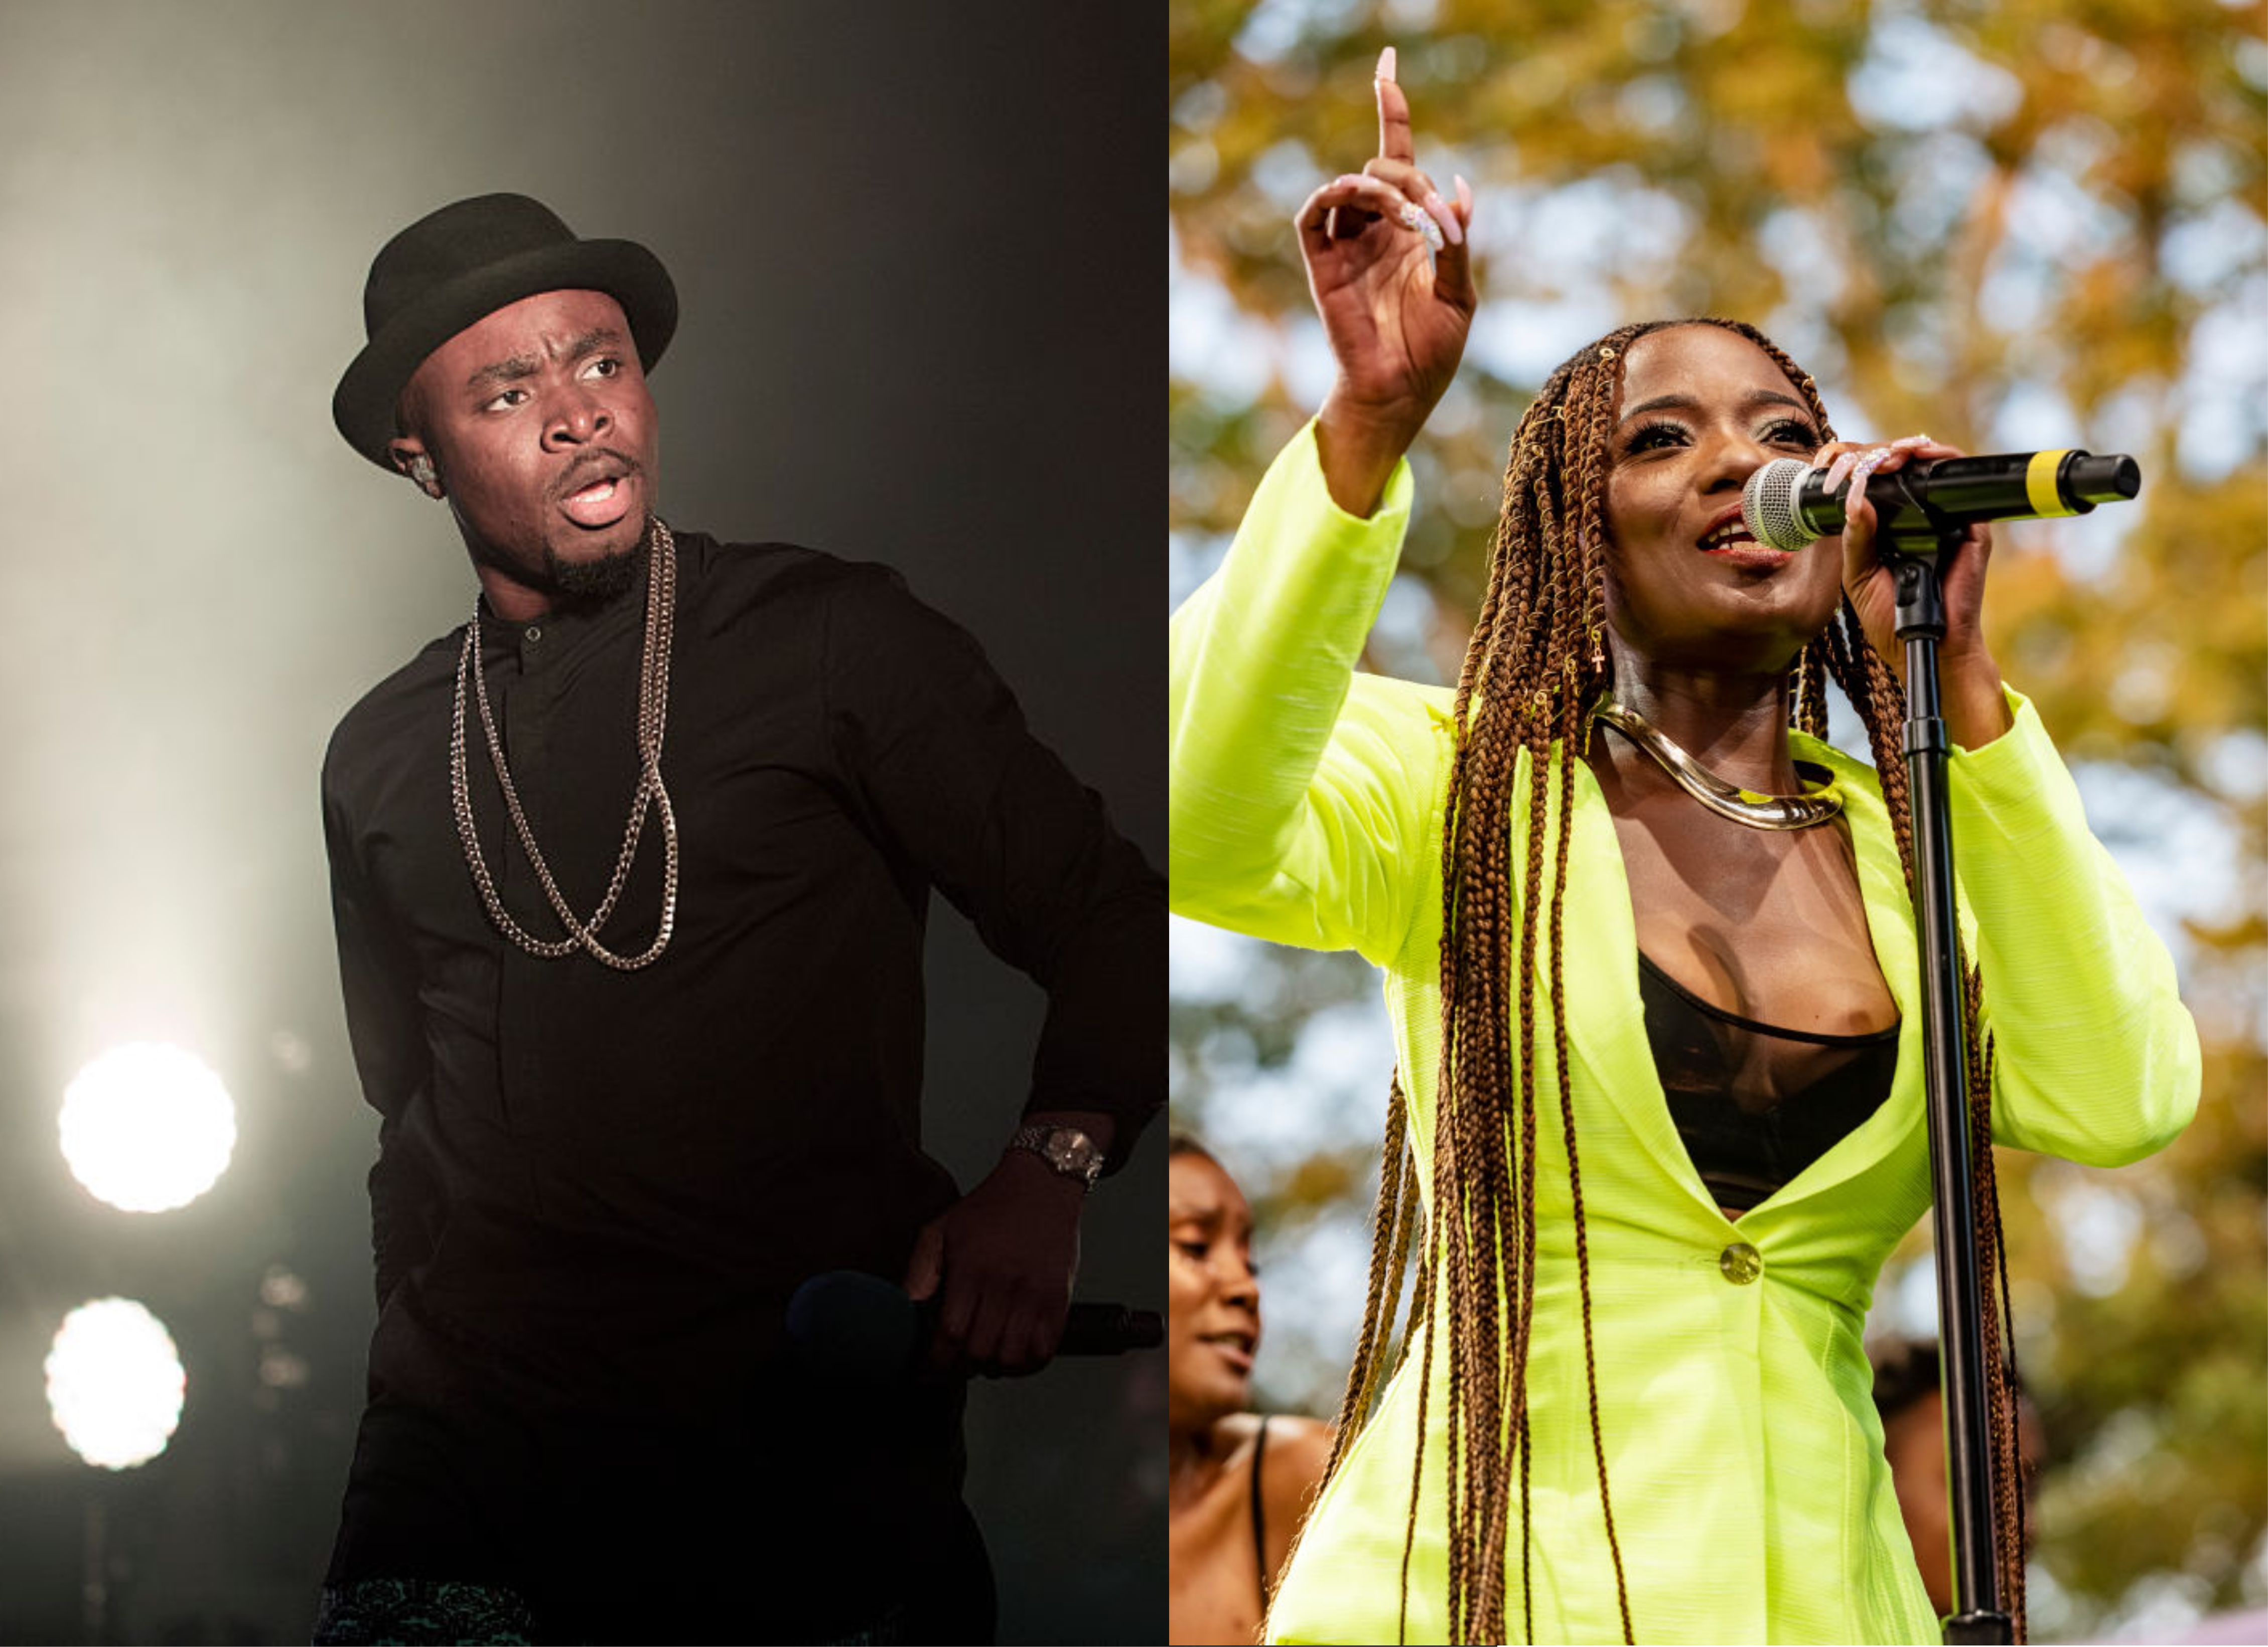 Top 25 richest musicians in Ghana and their net worth revealed